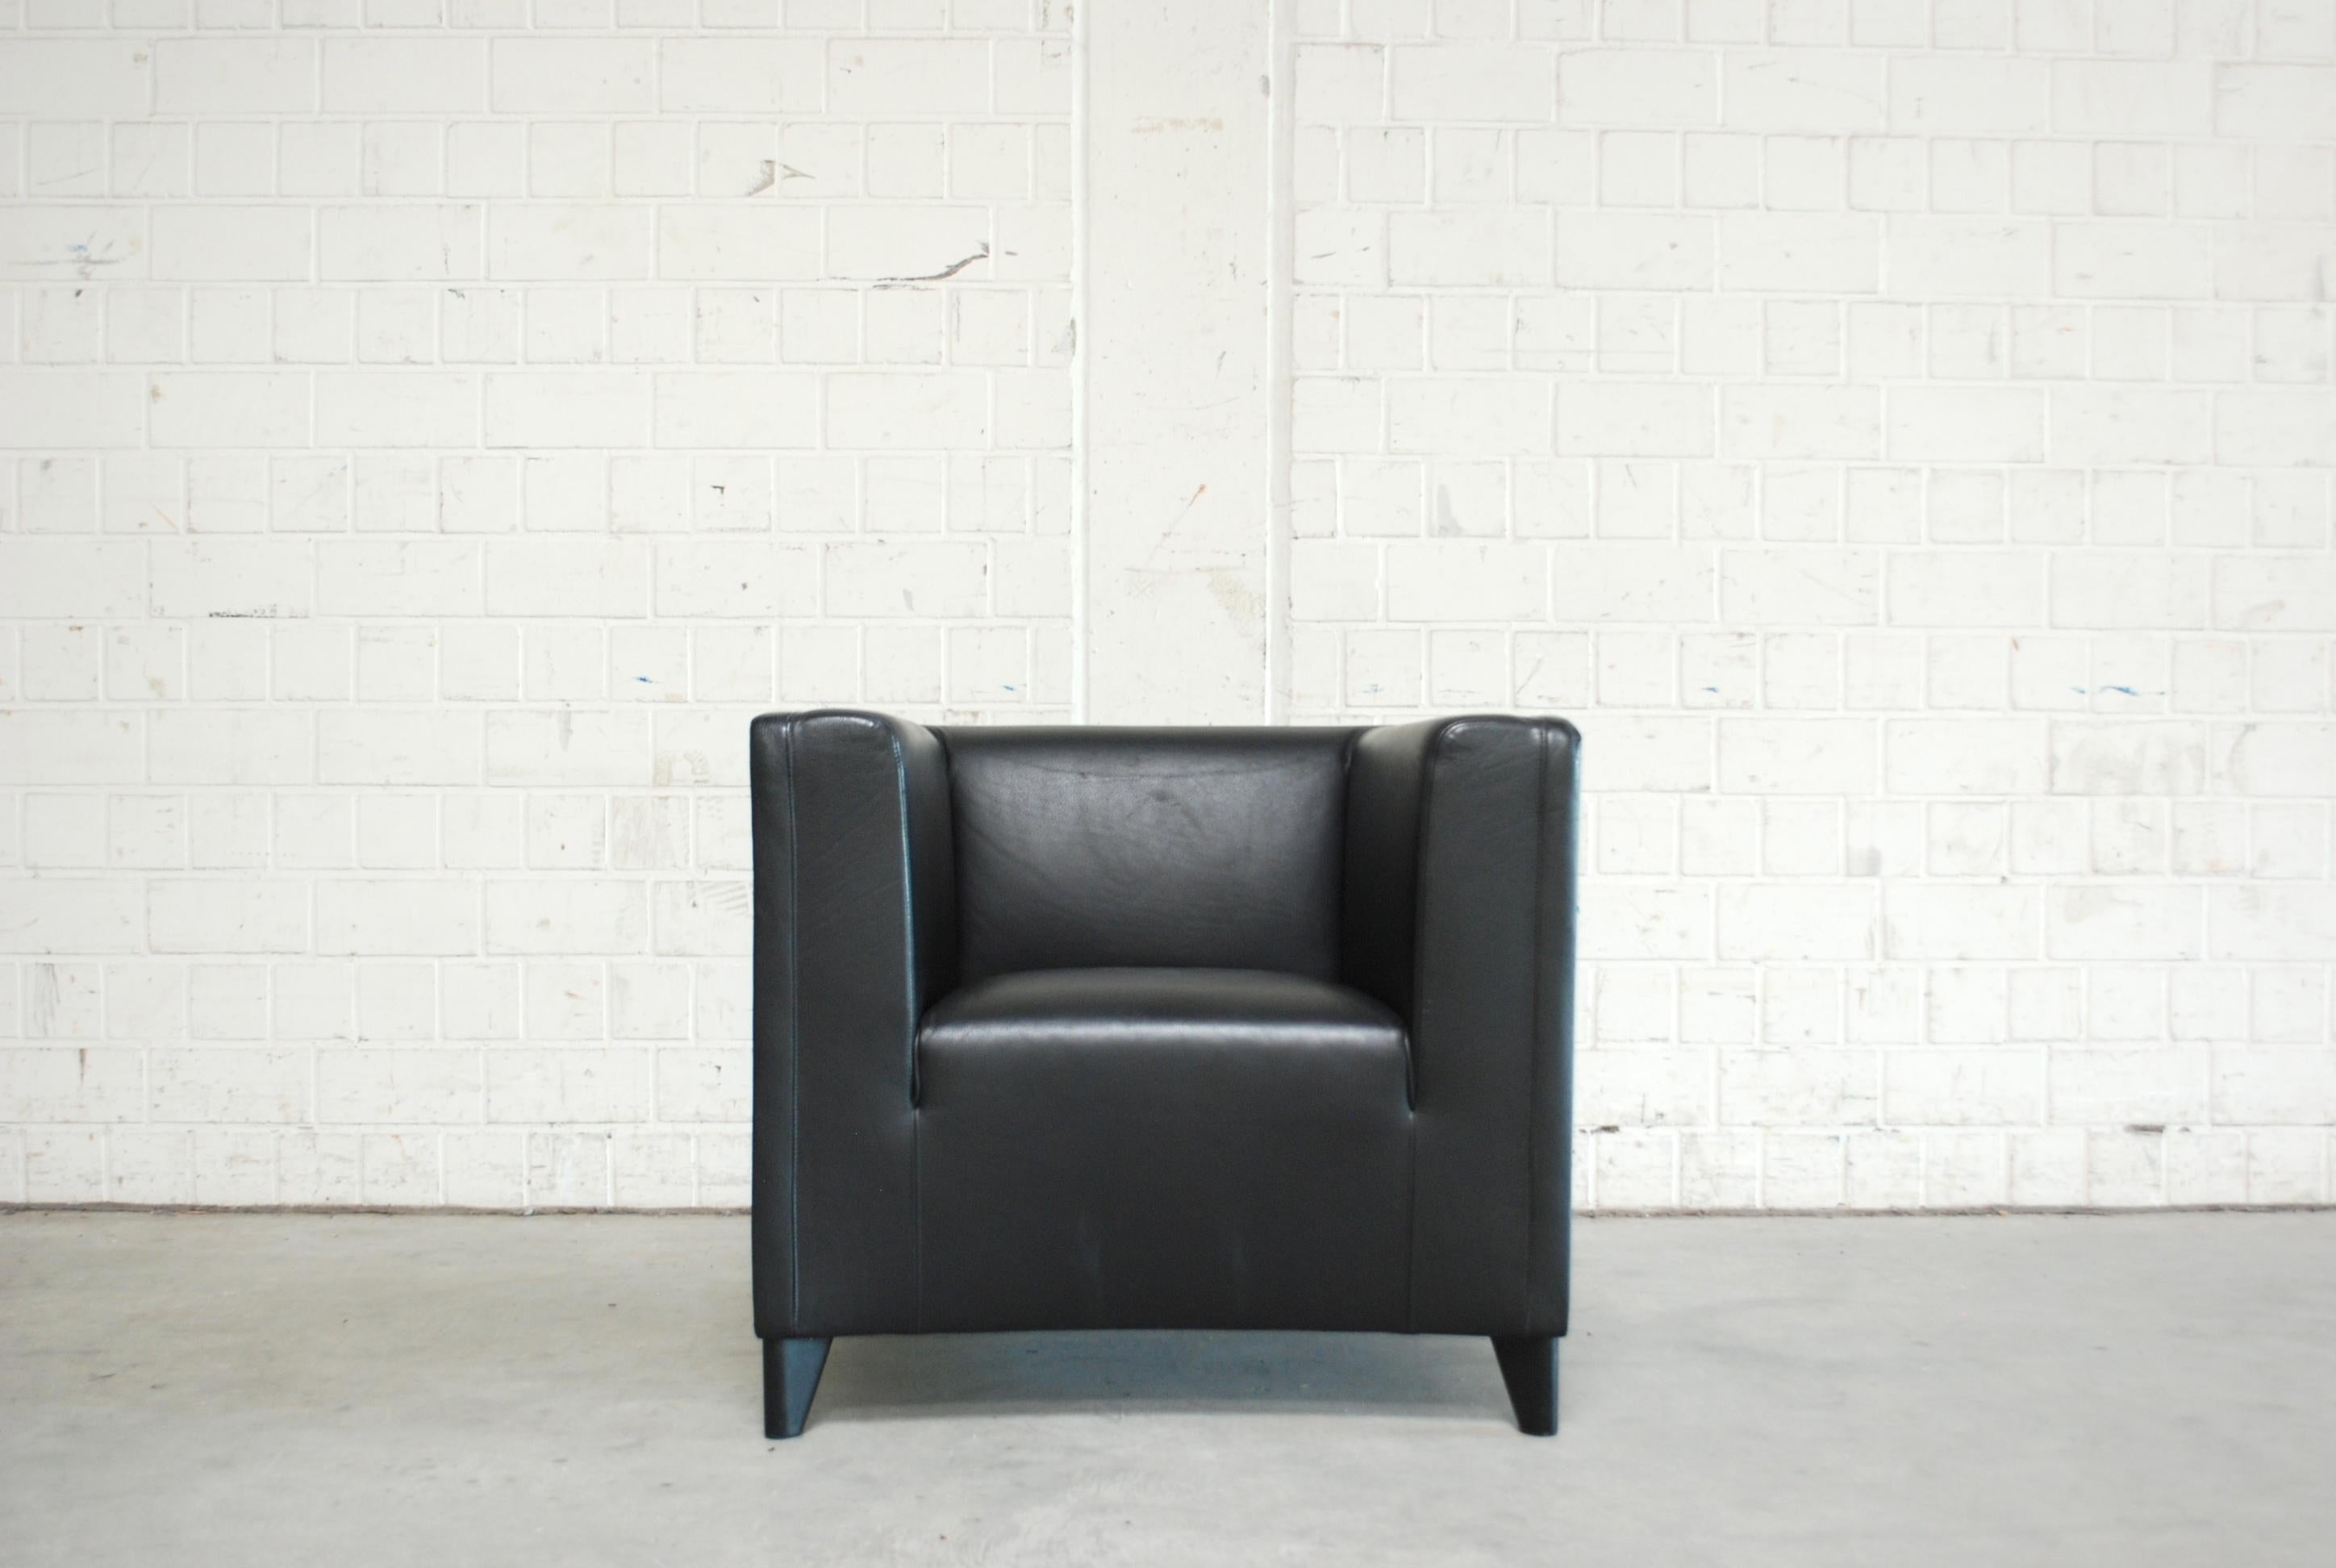 Modern Wittmann Black Leather Armchair Model Ducale Cube Design by Paolo Piva For Sale